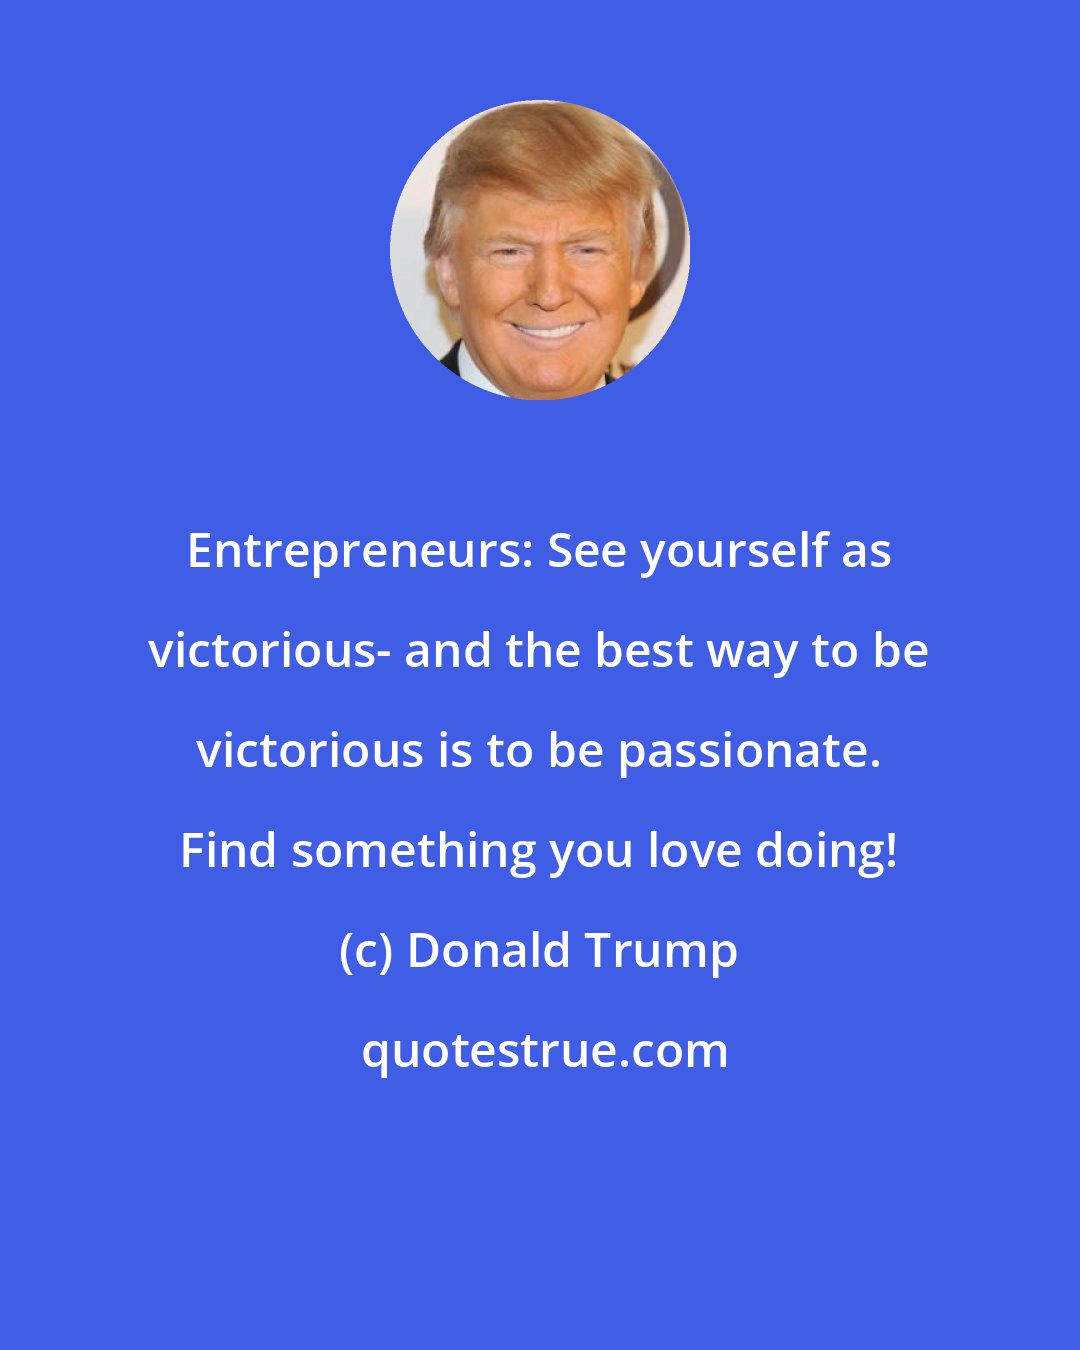 Donald Trump: Entrepreneurs: See yourself as victorious- and the best way to be victorious is to be passionate. Find something you love doing!